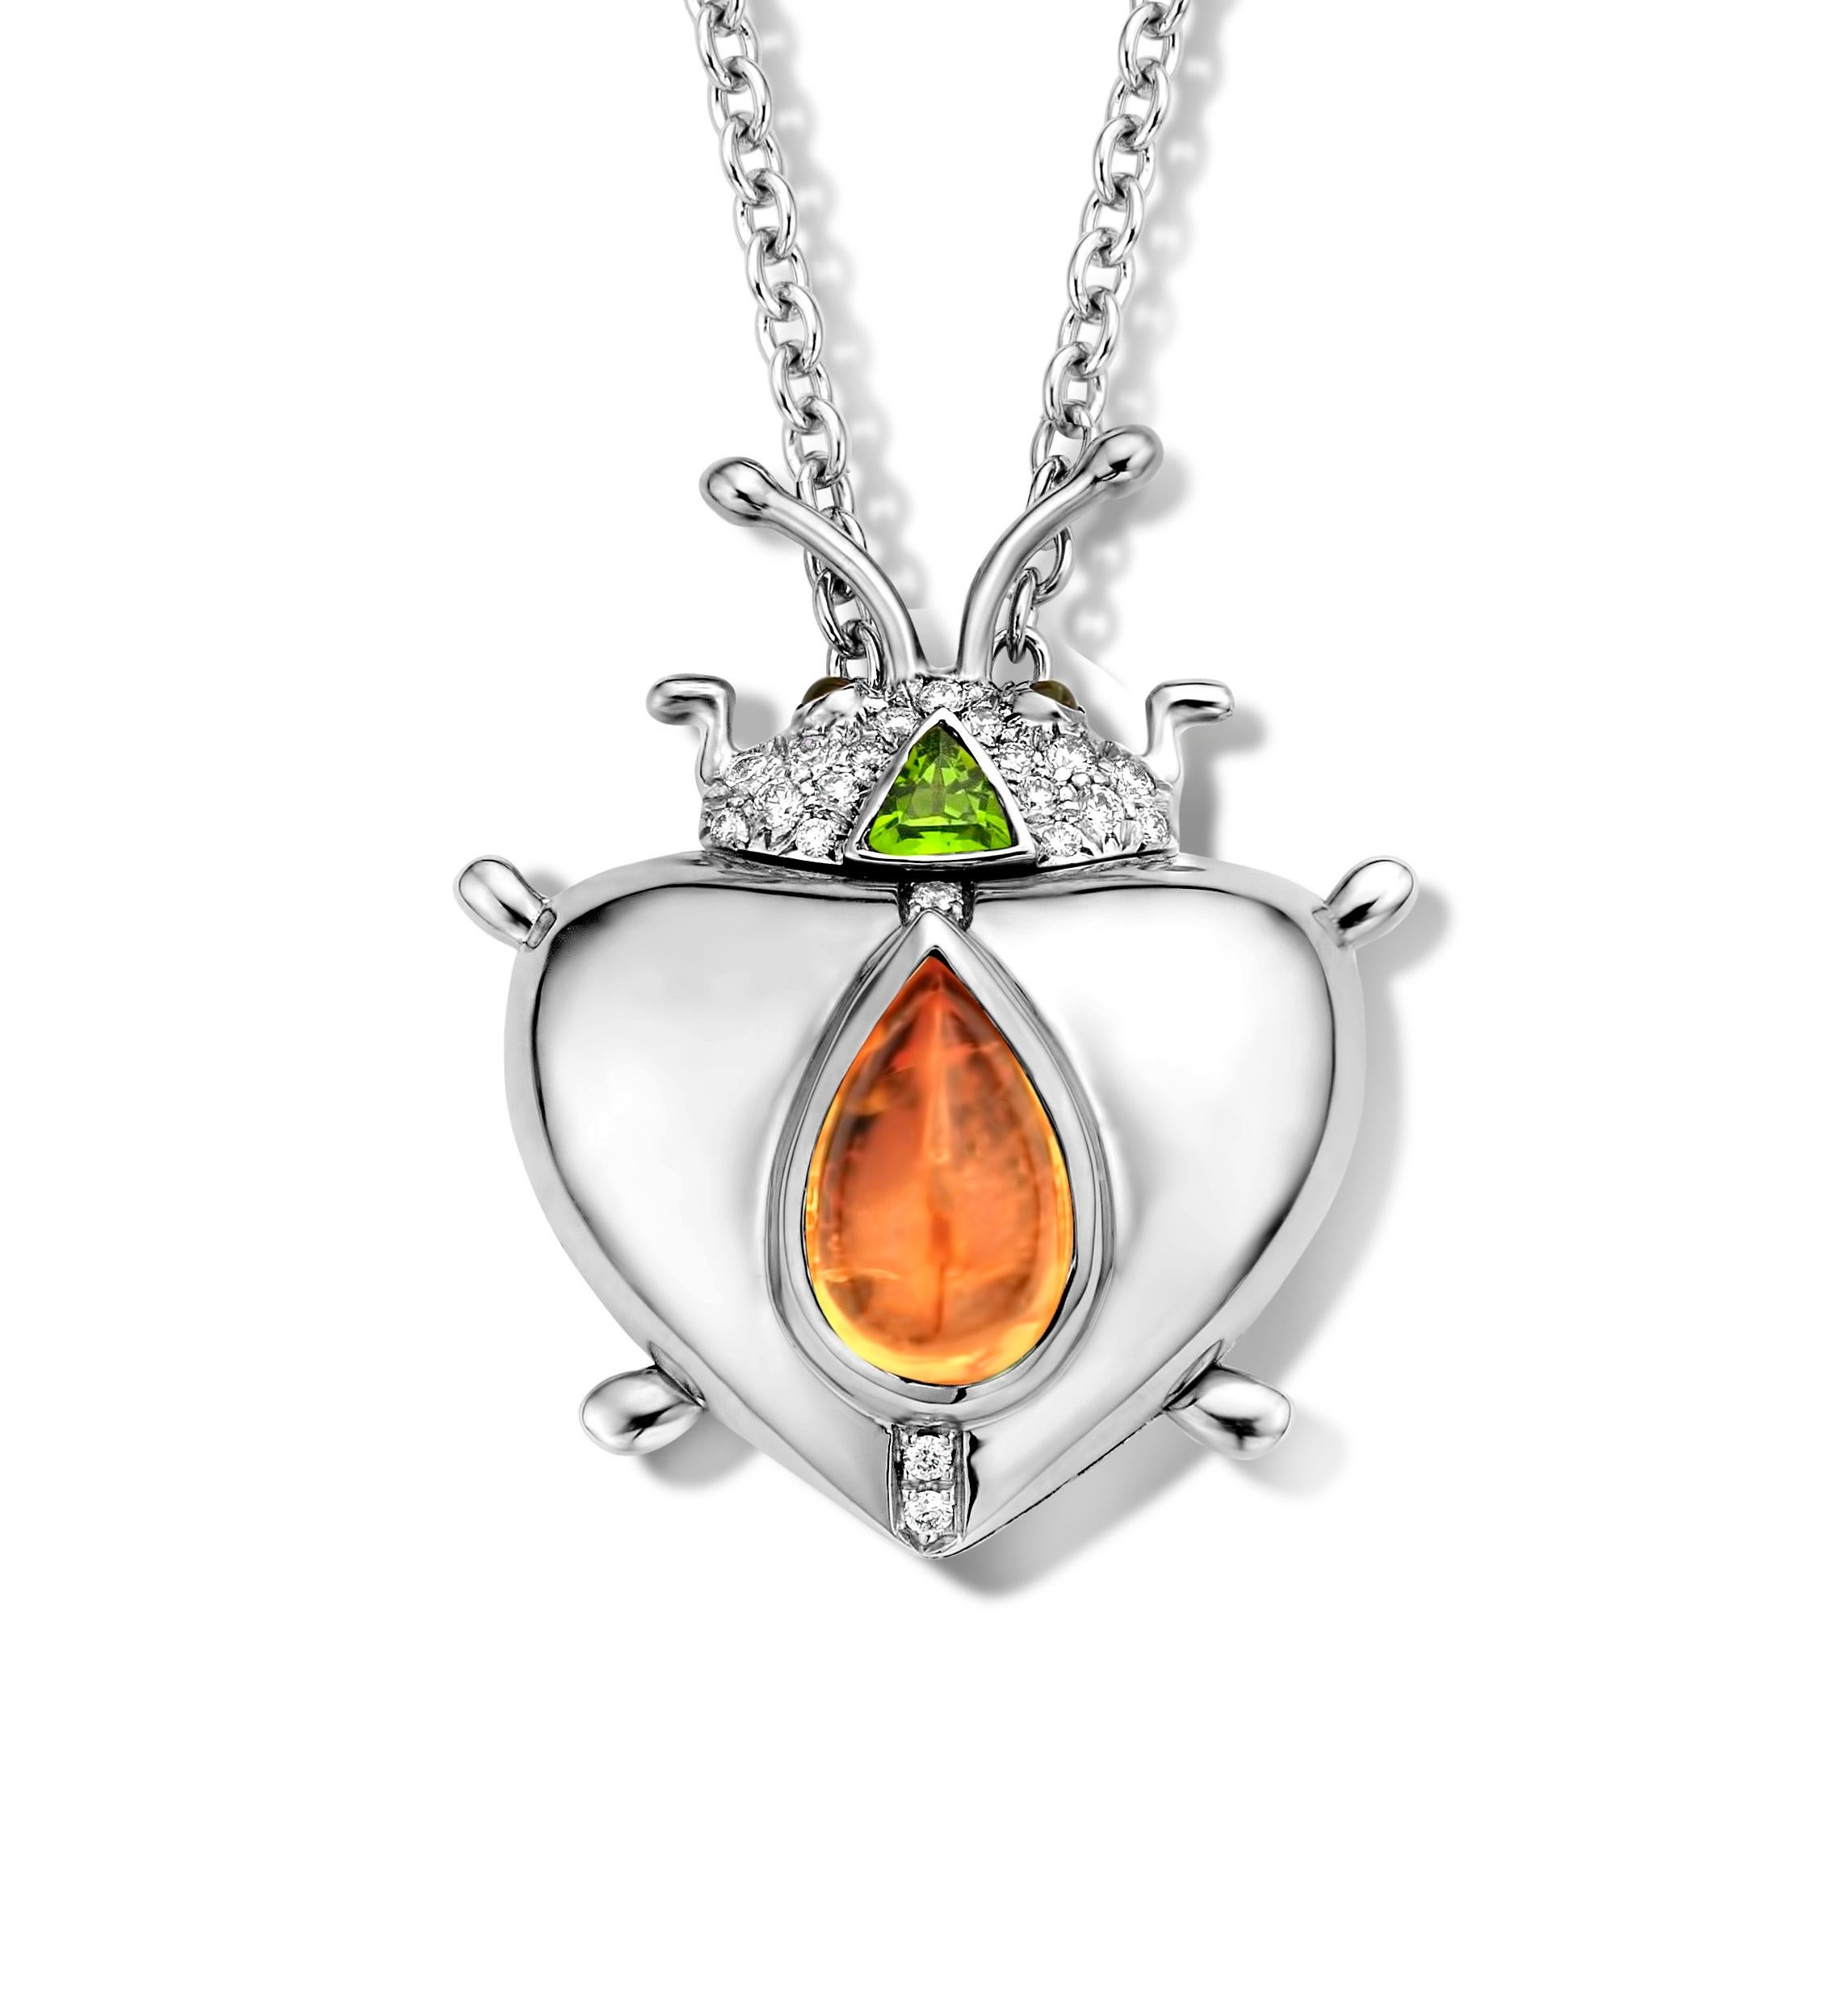 One of a kind lucky beetle necklace in 18K white gold 17,6g set with the finest diamonds in brilliant cut 0,14Ct (VVS/DEF quality) and one natural, Mandarin garnet in pear cabochon cut 2,73Ct. The head is set with a pink tourmaline in trillion cut,